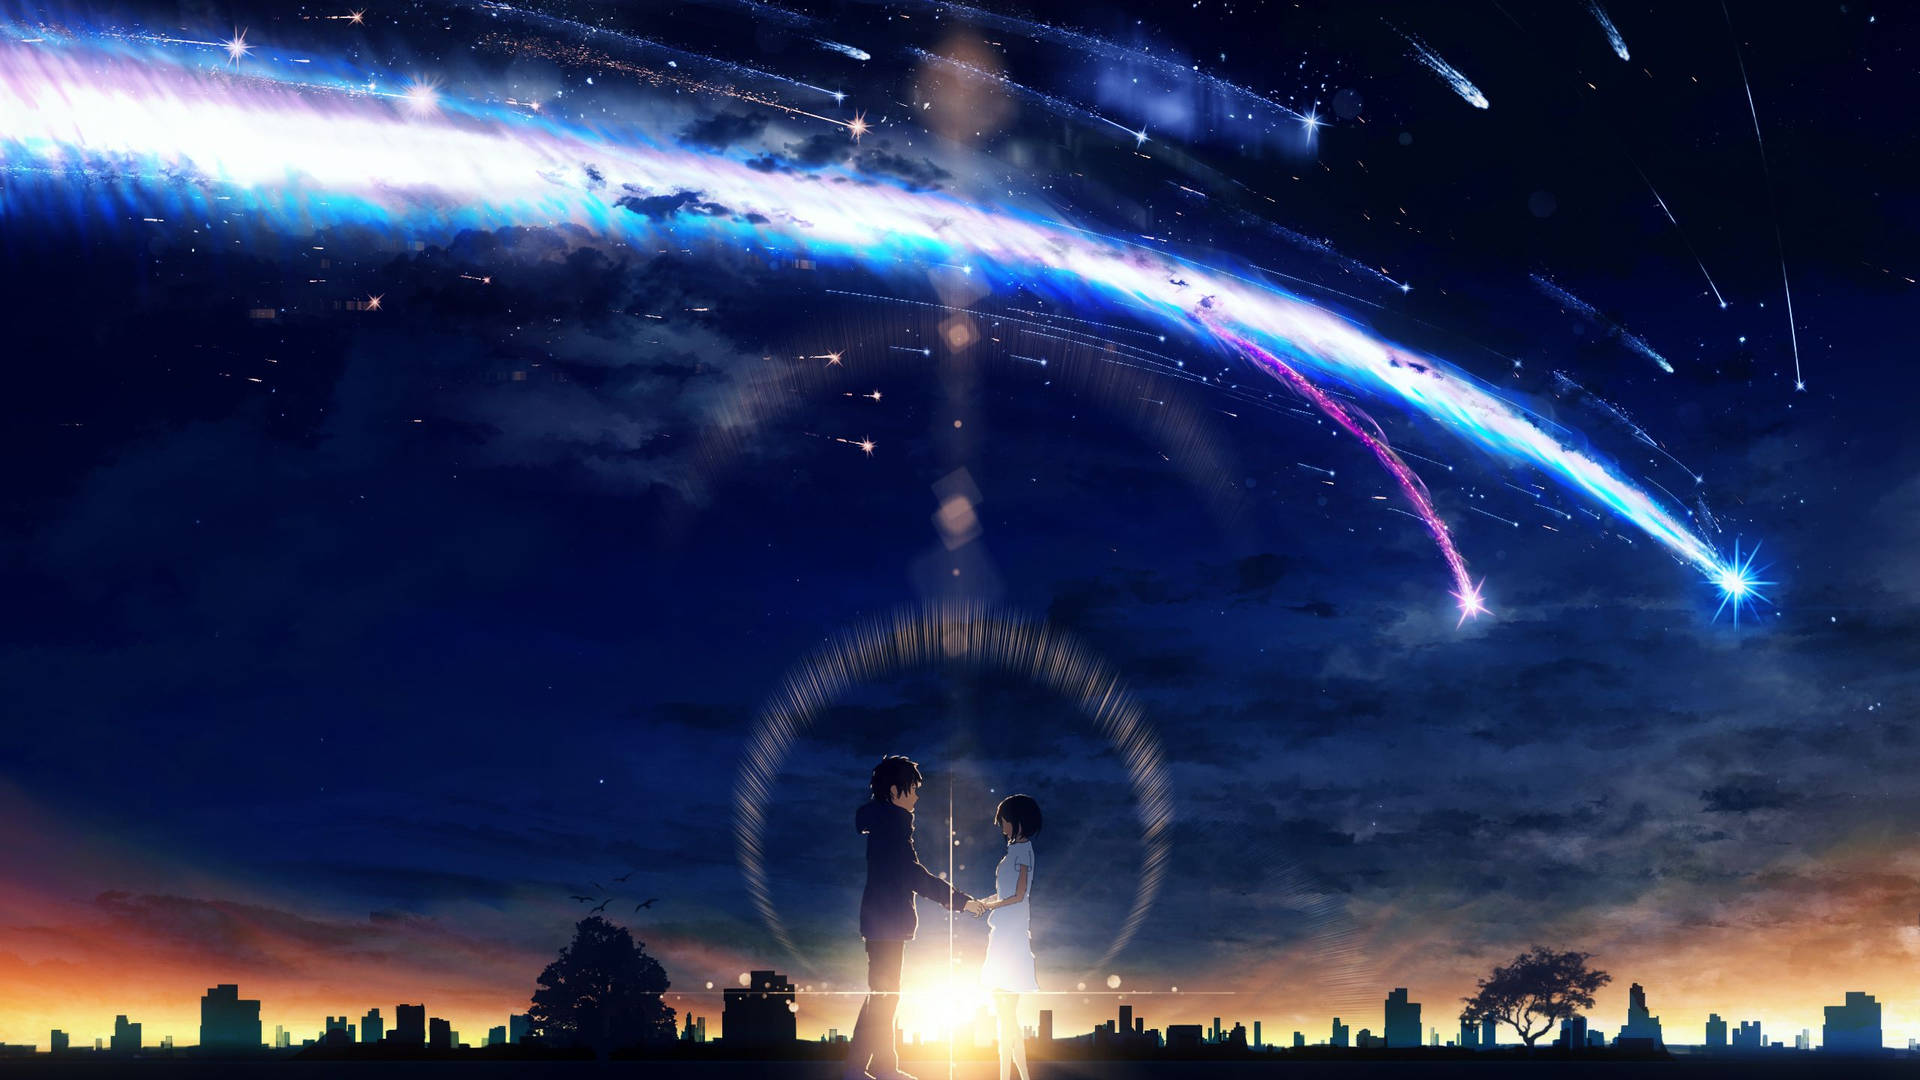 Beautiful Illustration From Your Name Anime Wallpaper